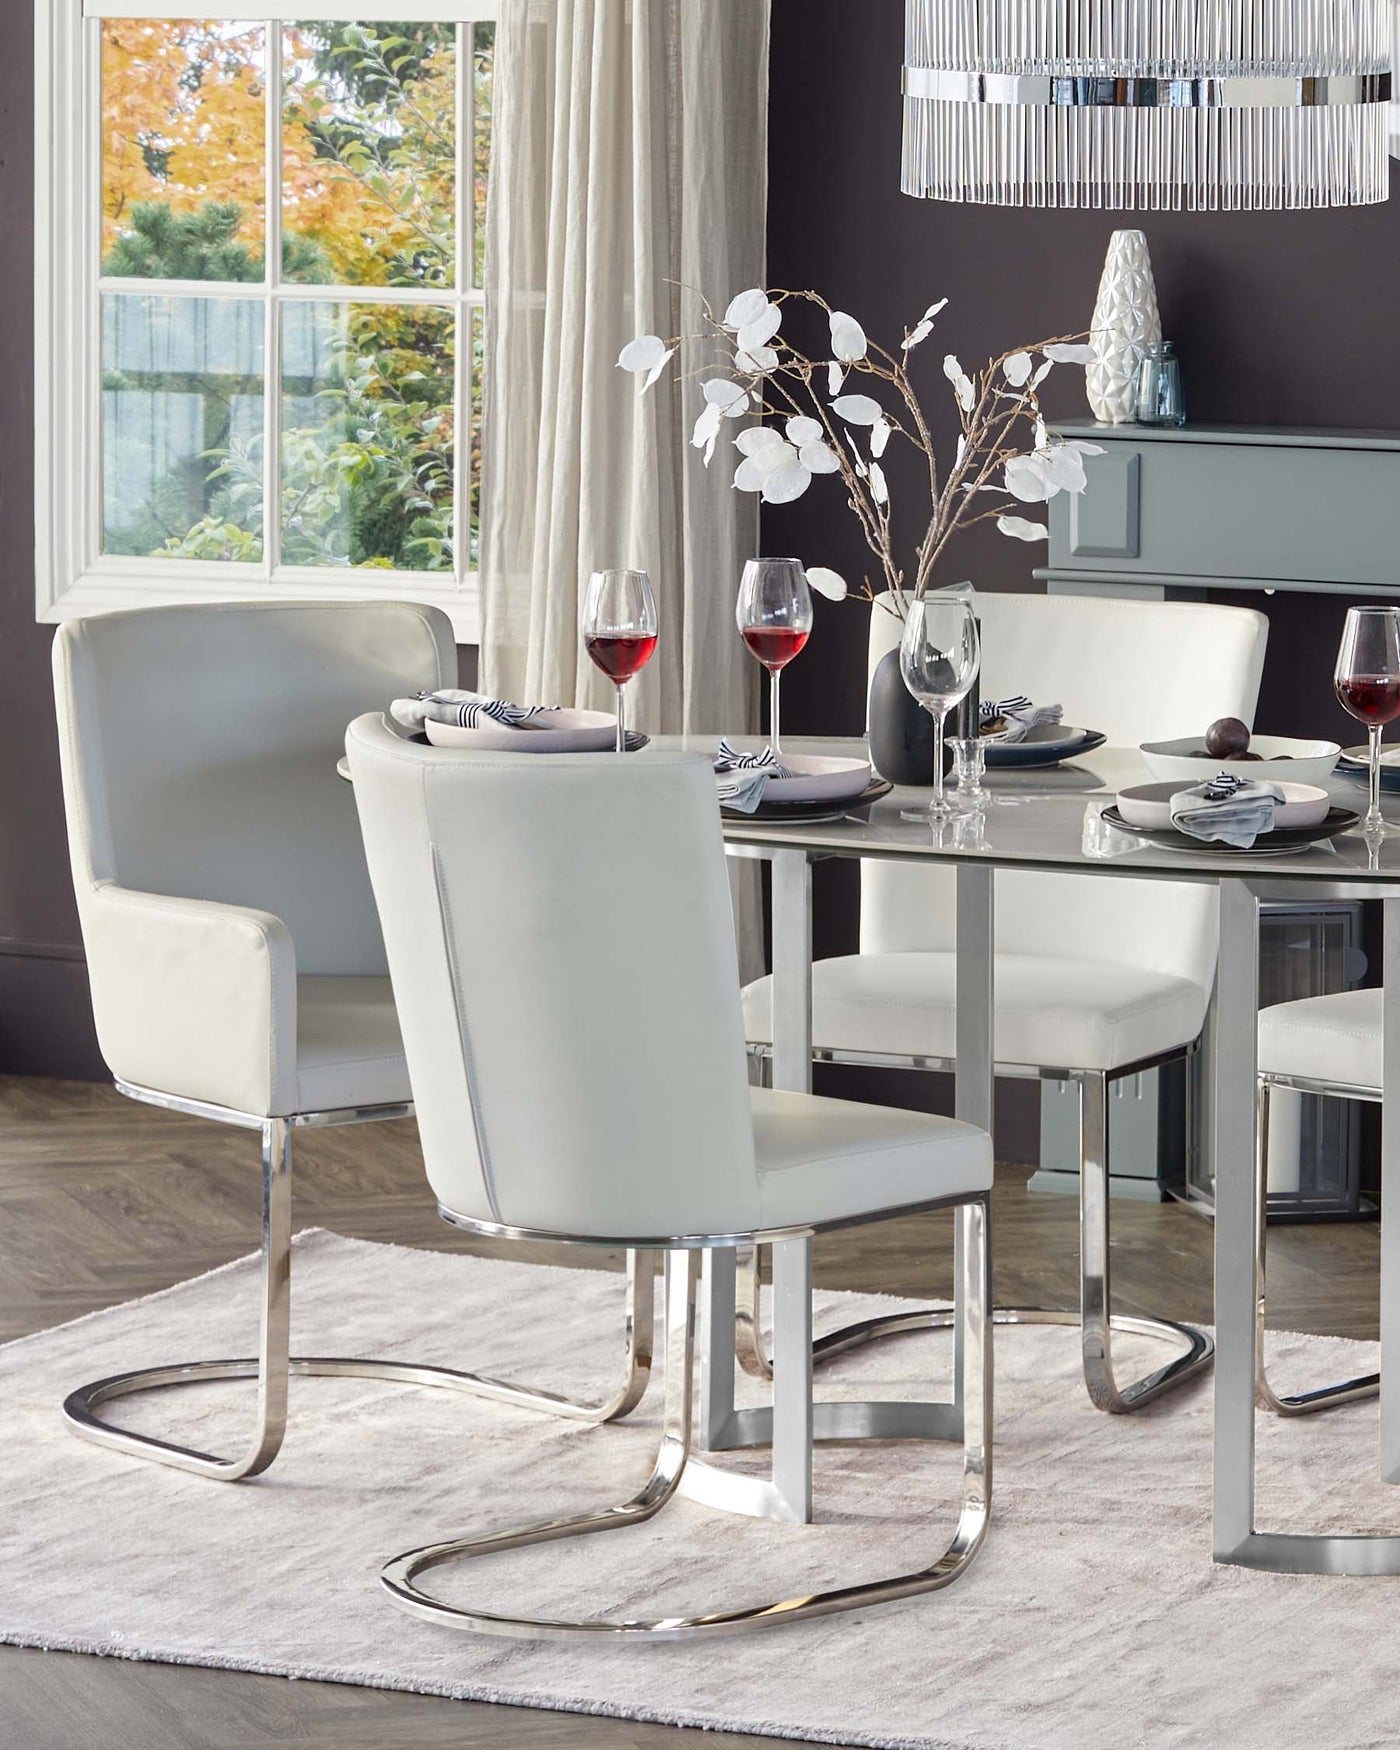 Modern dining room set featuring a rectangular table with a sleek, reflective chrome base and a clear glass tabletop. Accompanied by four elegant, high-backed chairs upholstered in white faux leather with gently curved chrome legs.